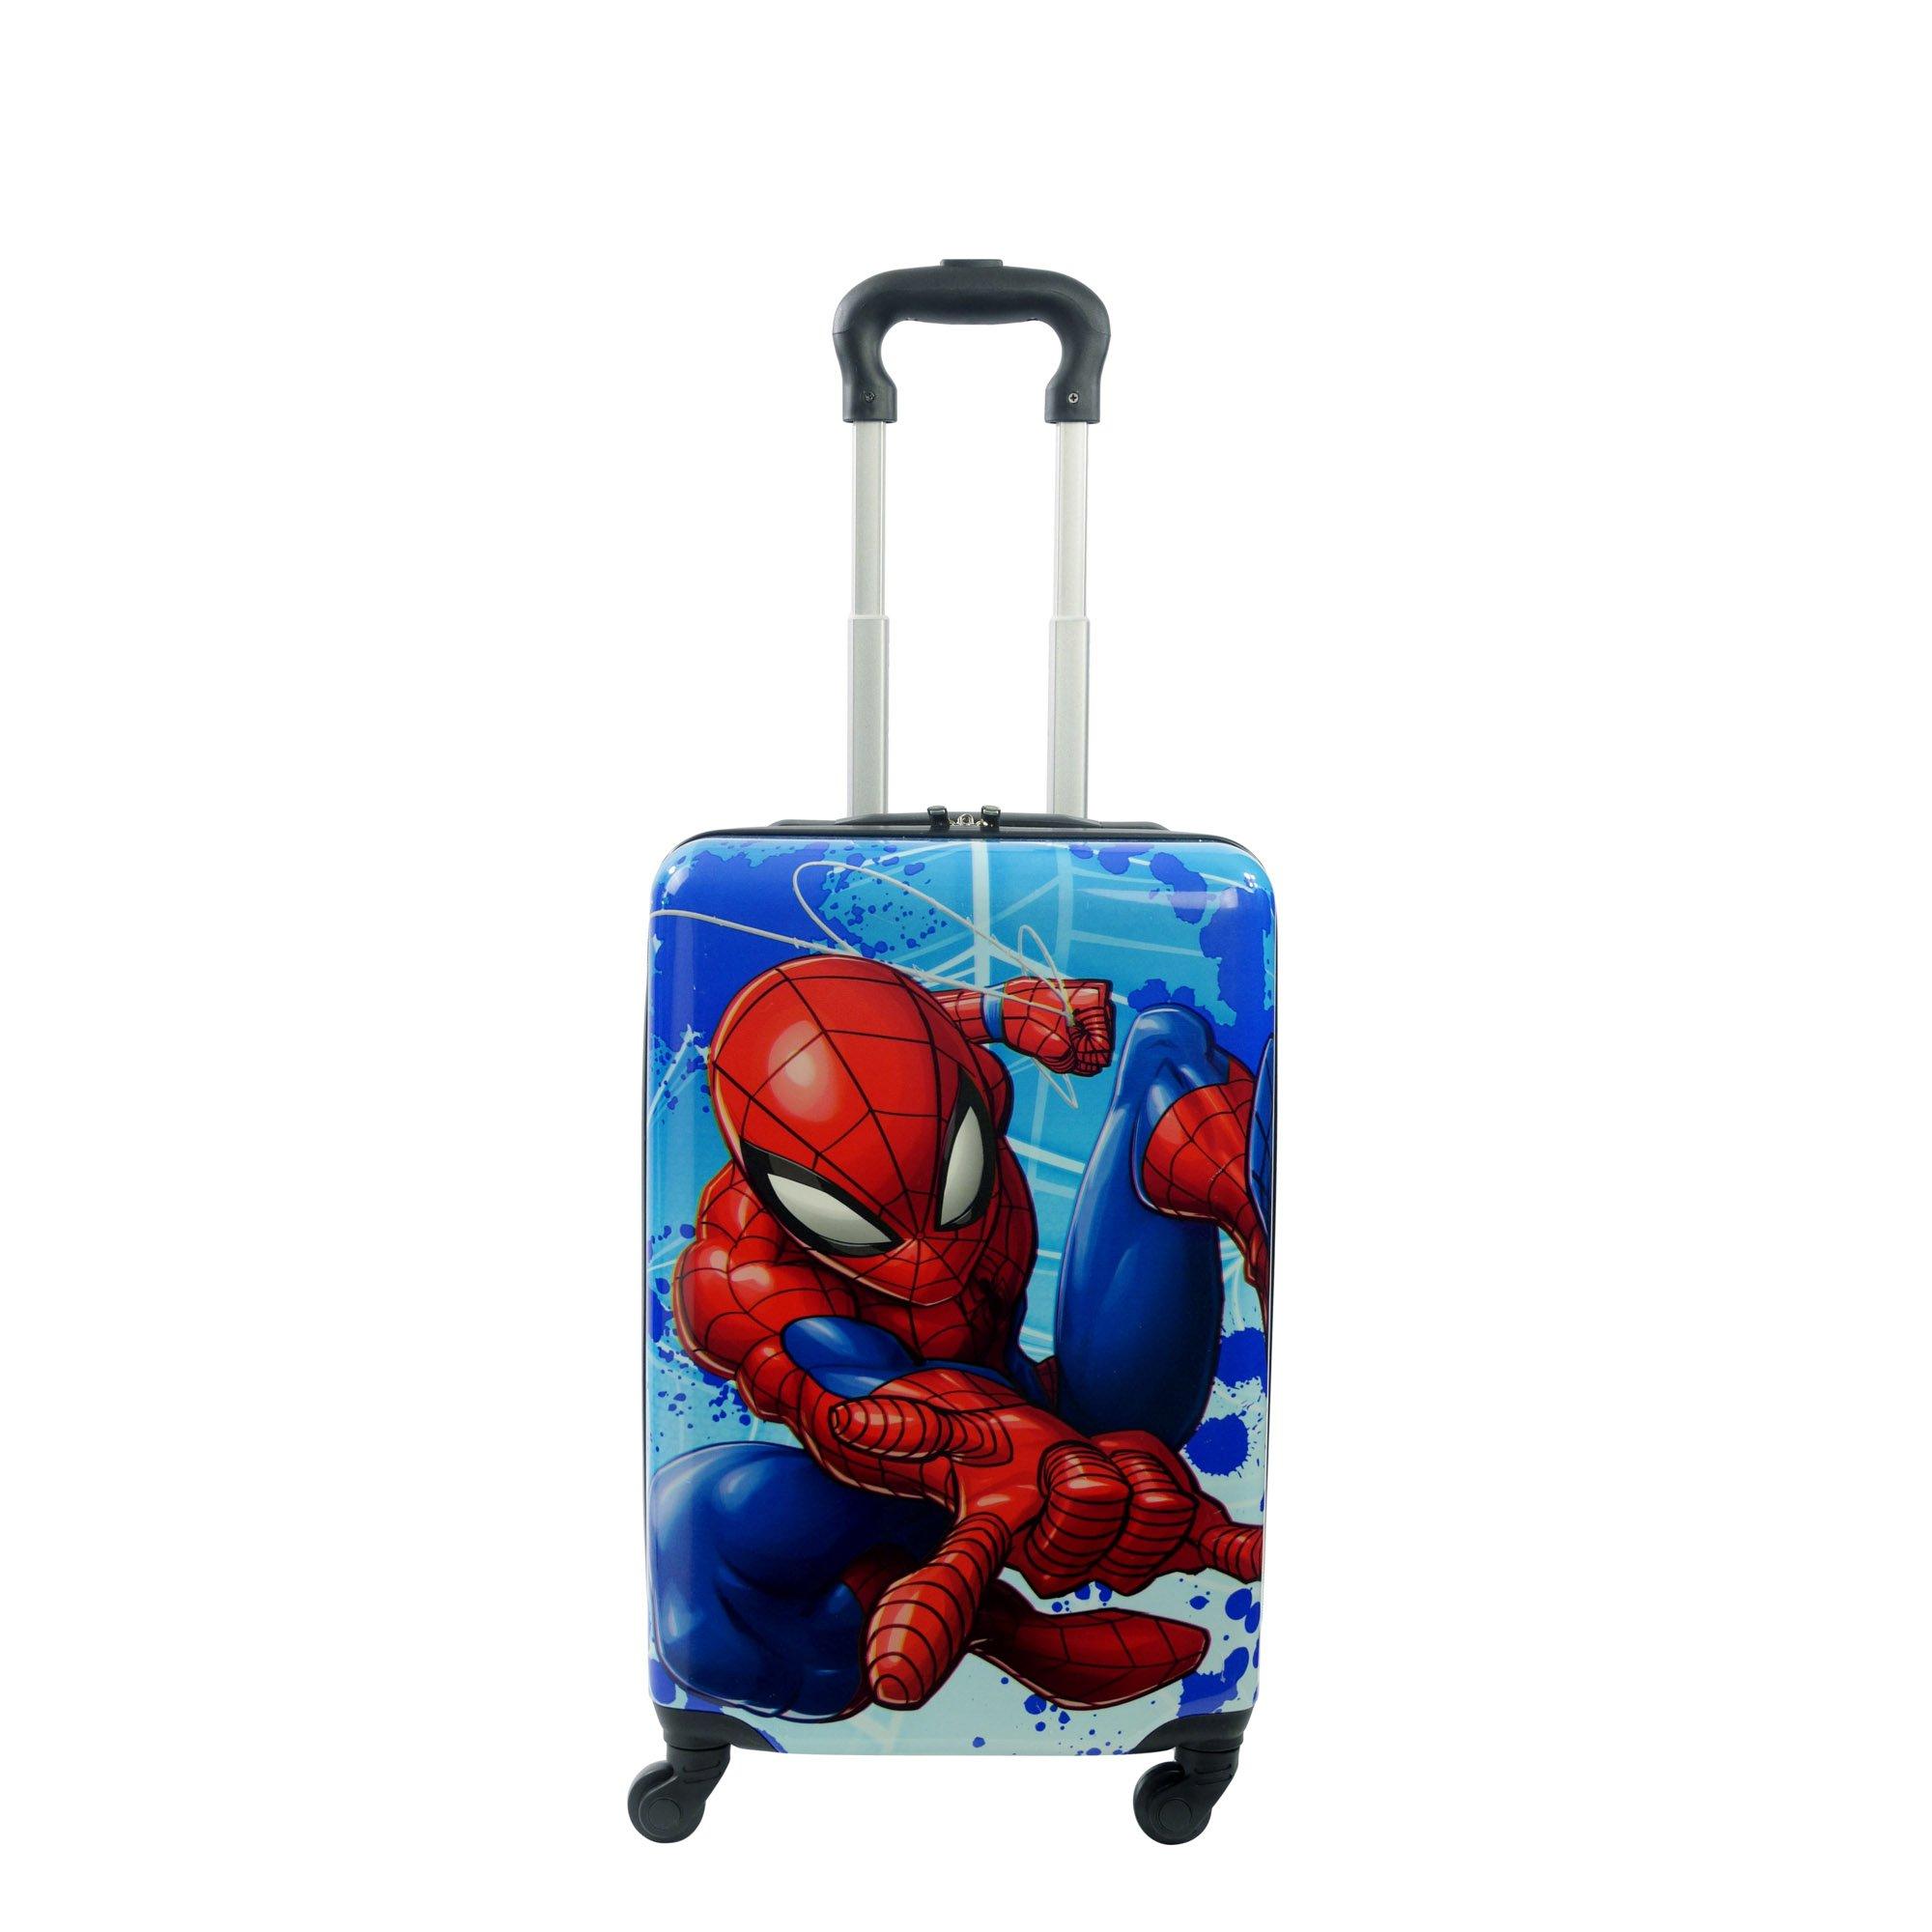 Marvel Spiderman Kids 21-in Hard-Sided Roller Luggage